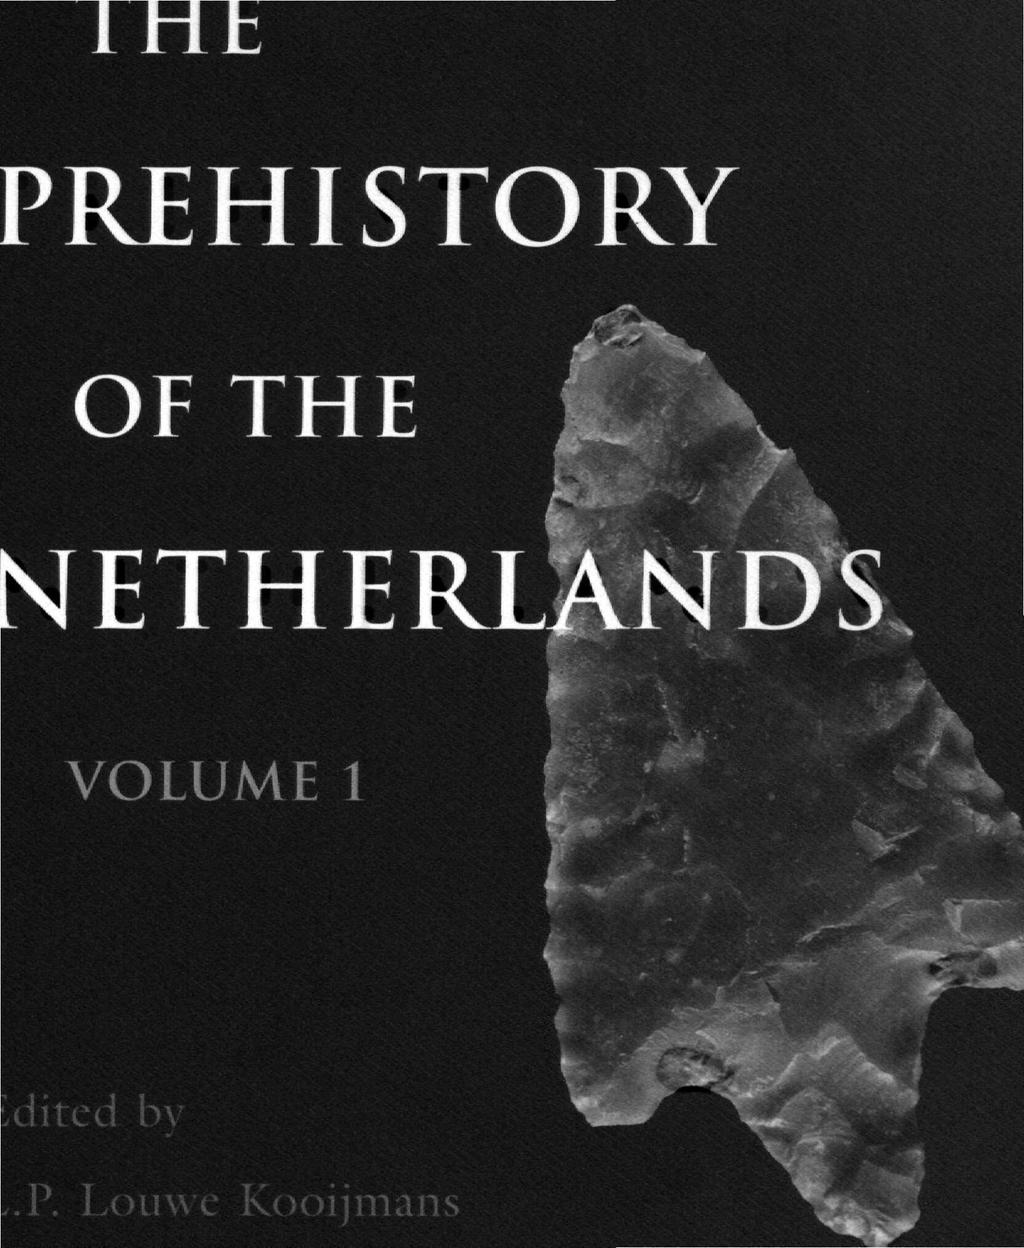 Tfft PREHISTORY OF THE NETHERL